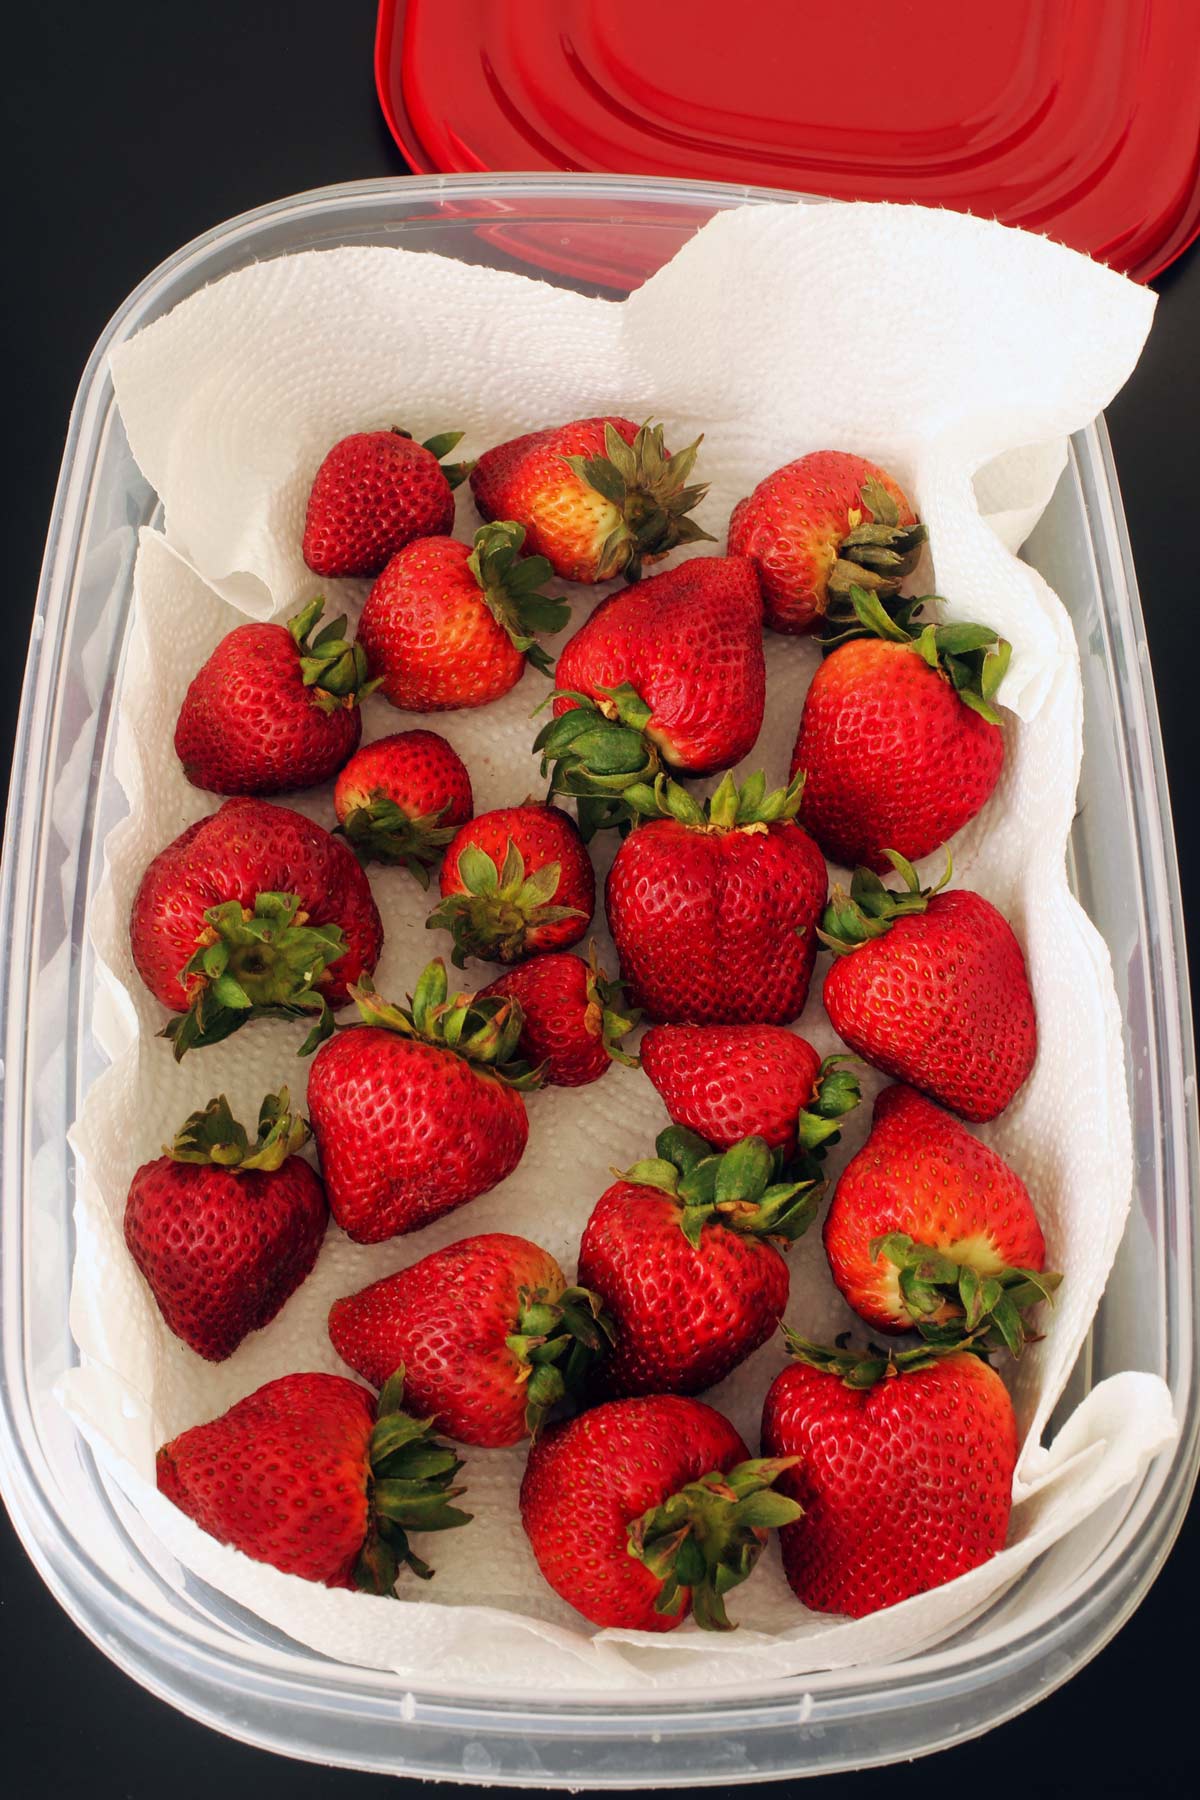 strawberries in paper towel lined plastic container.